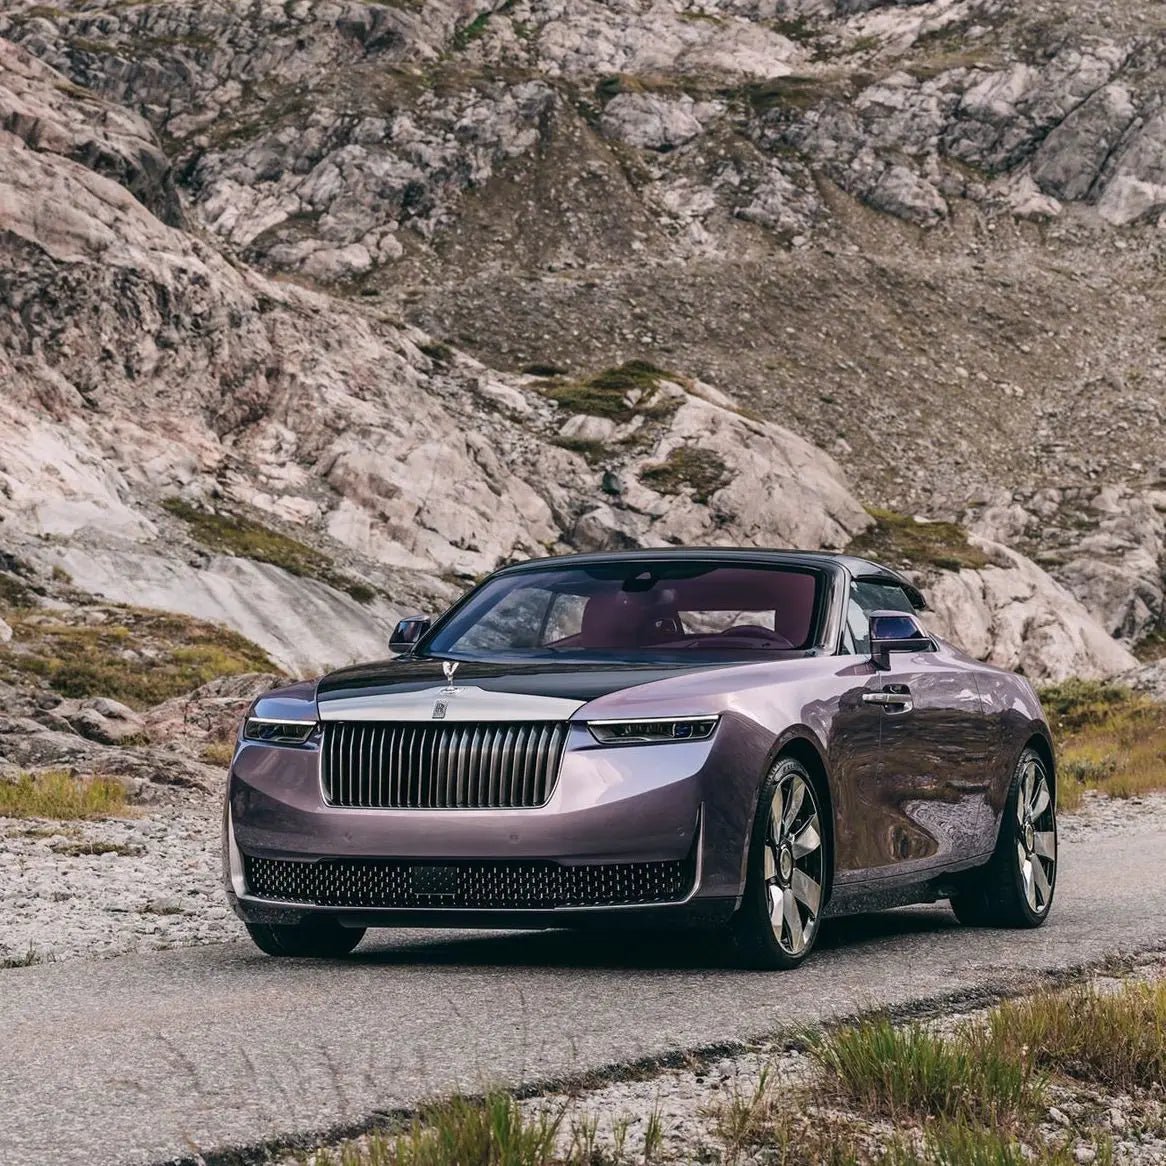 Rolls-Royce and Vacheron Constantin: A Fusion of Unparalleled Class - Wonders of Luxury